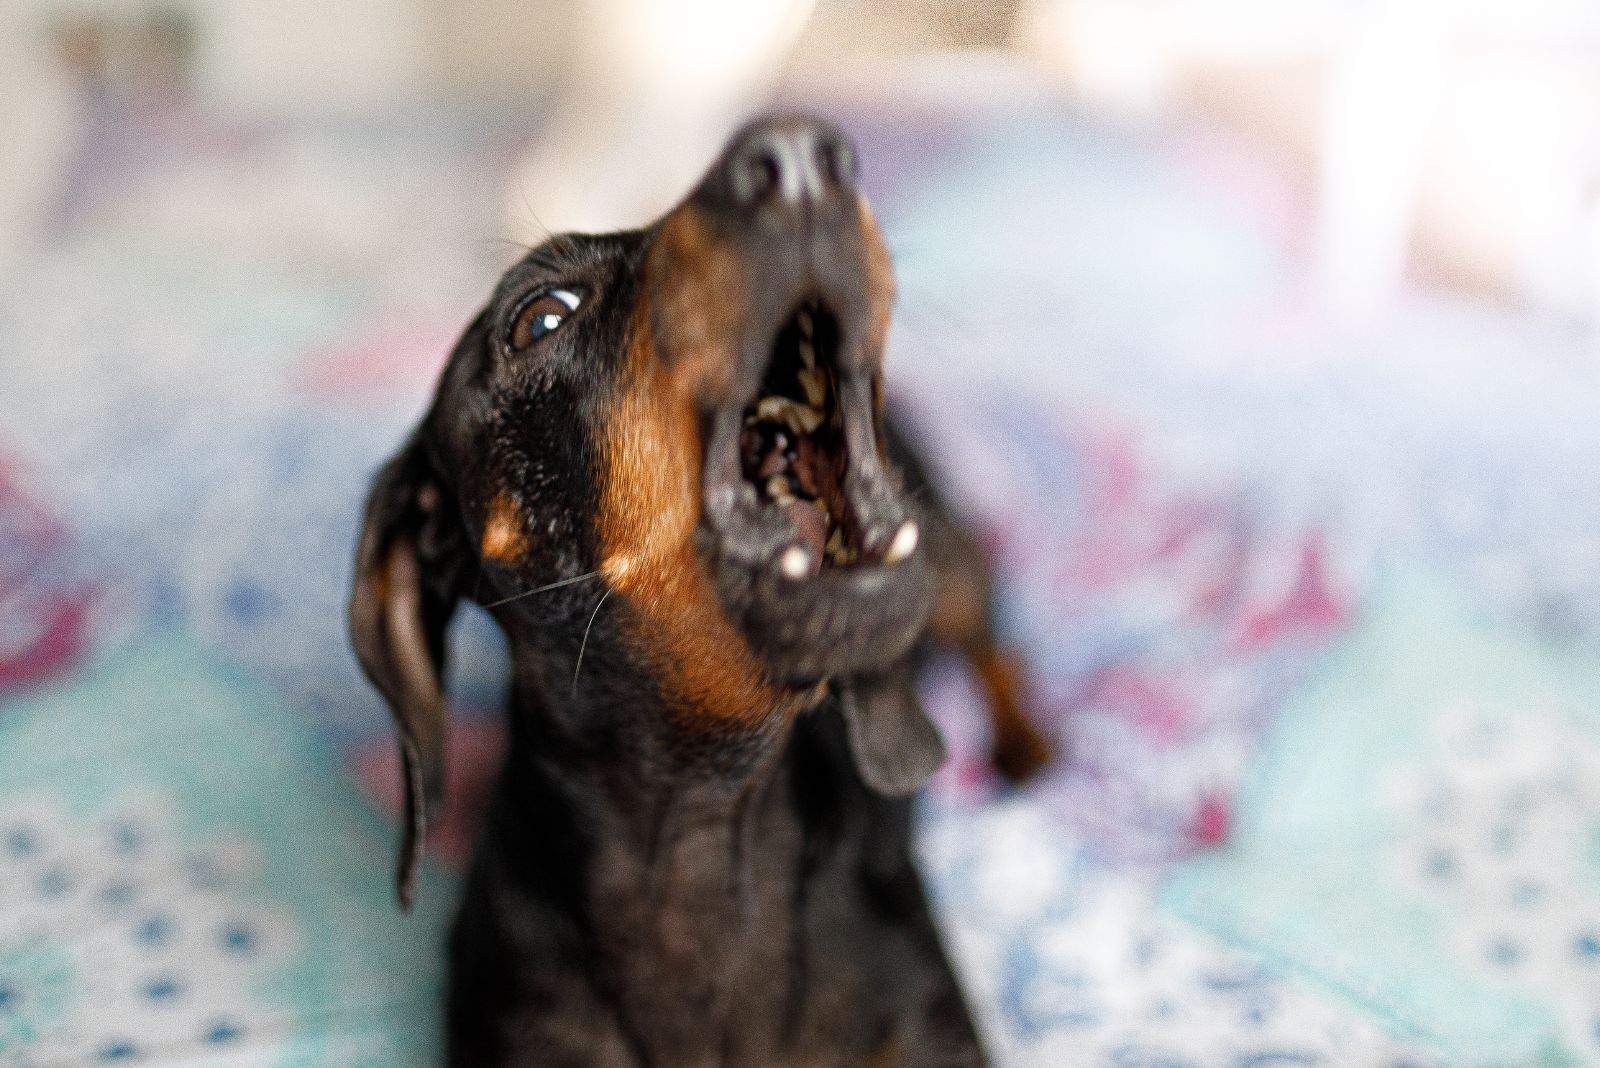 black and tan dachshund barking inside the bedroom